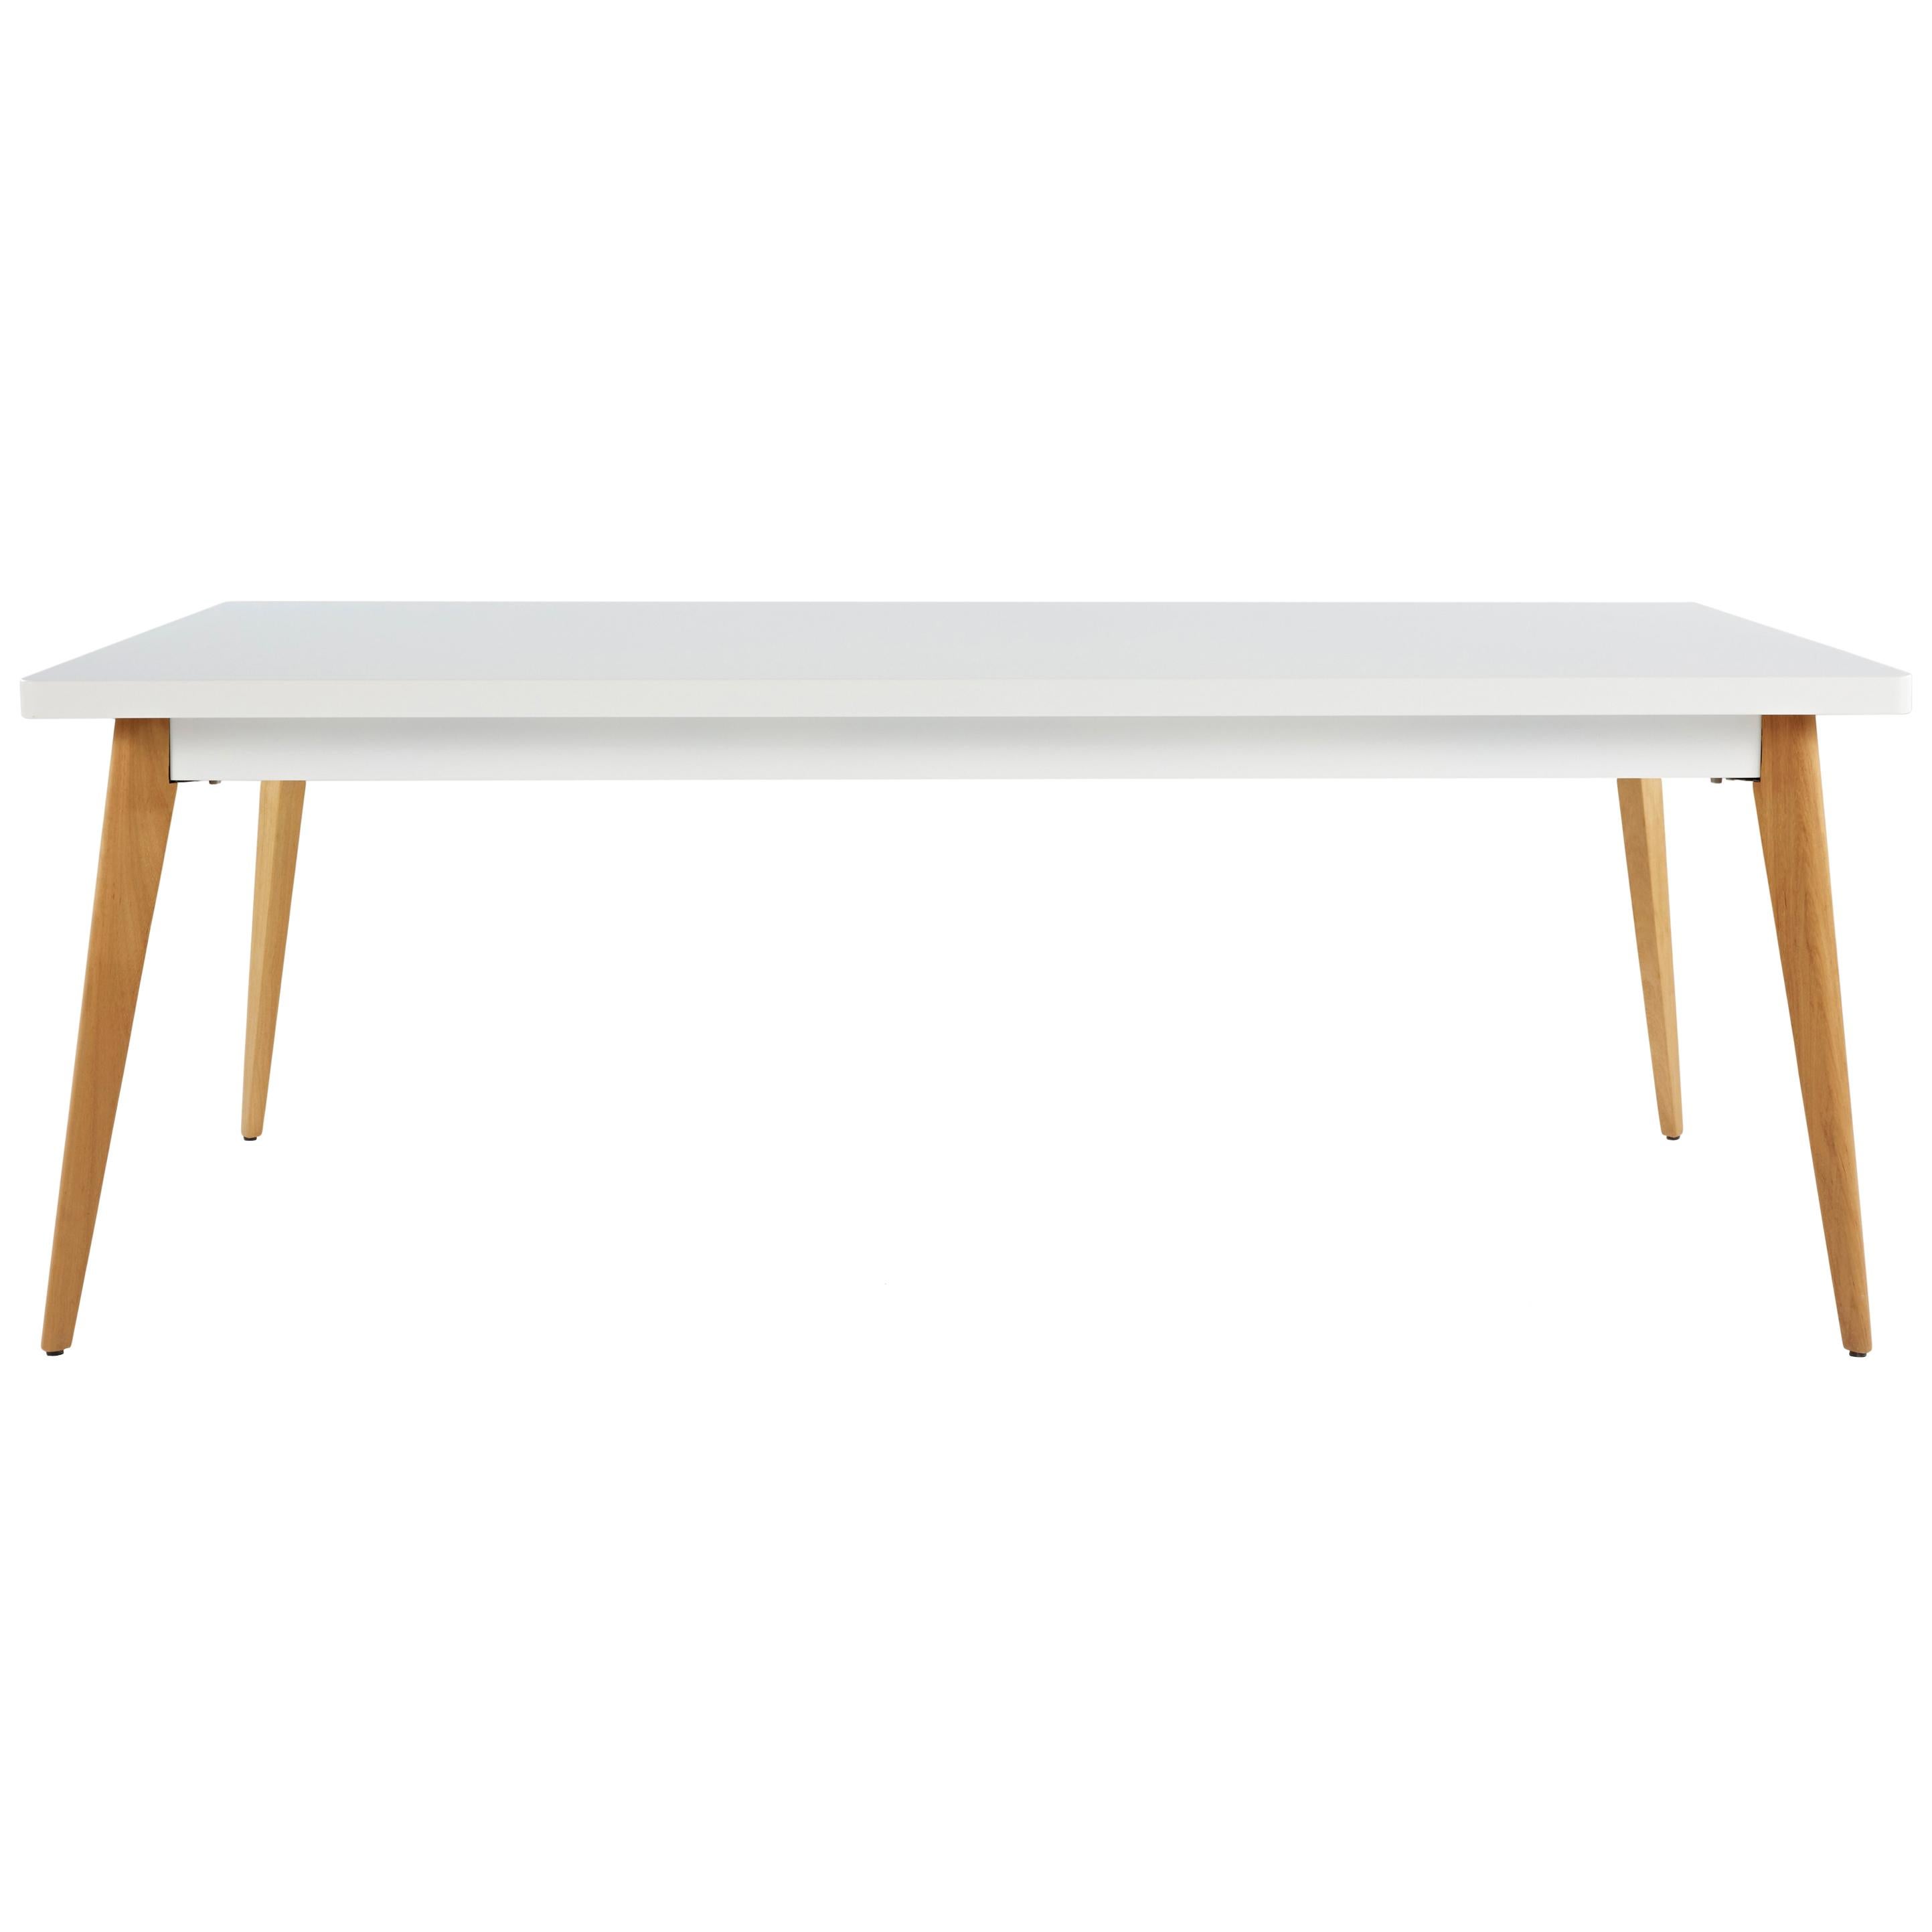 For Sale: White (Blanc) 55 Table 95x200 with Wood Legs in Essential Colors by Jean Pauchard & Tolix